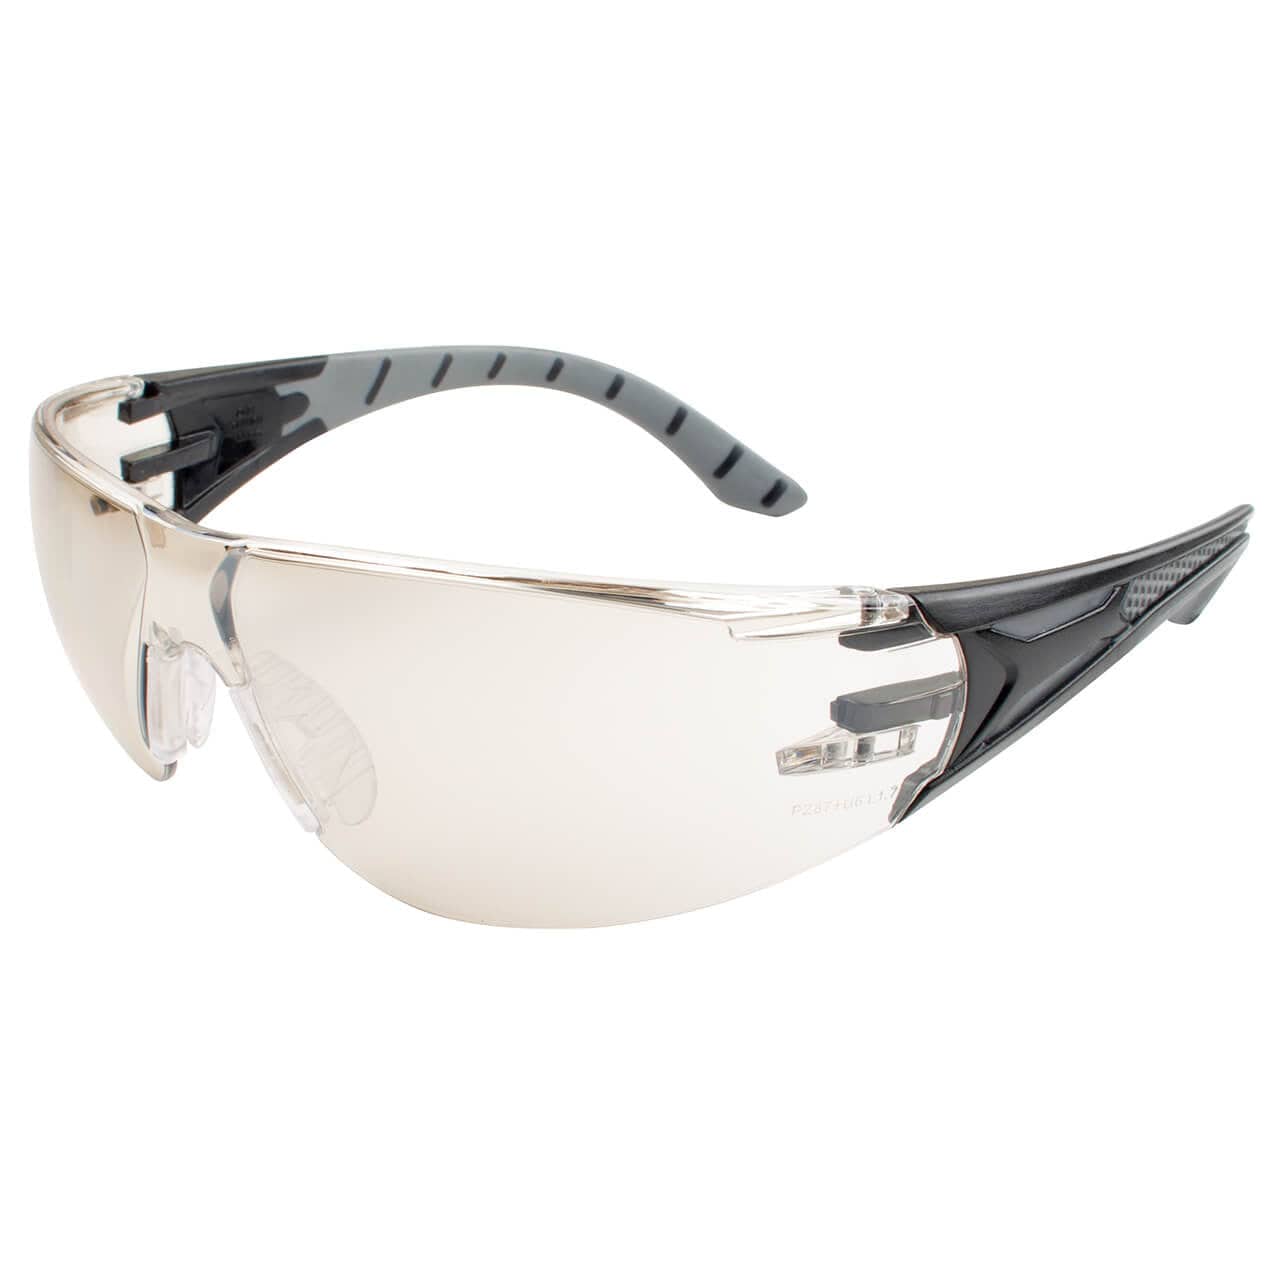 Metel M50 Safety Glasses with Indoor-Outdoor Mirror Lenses